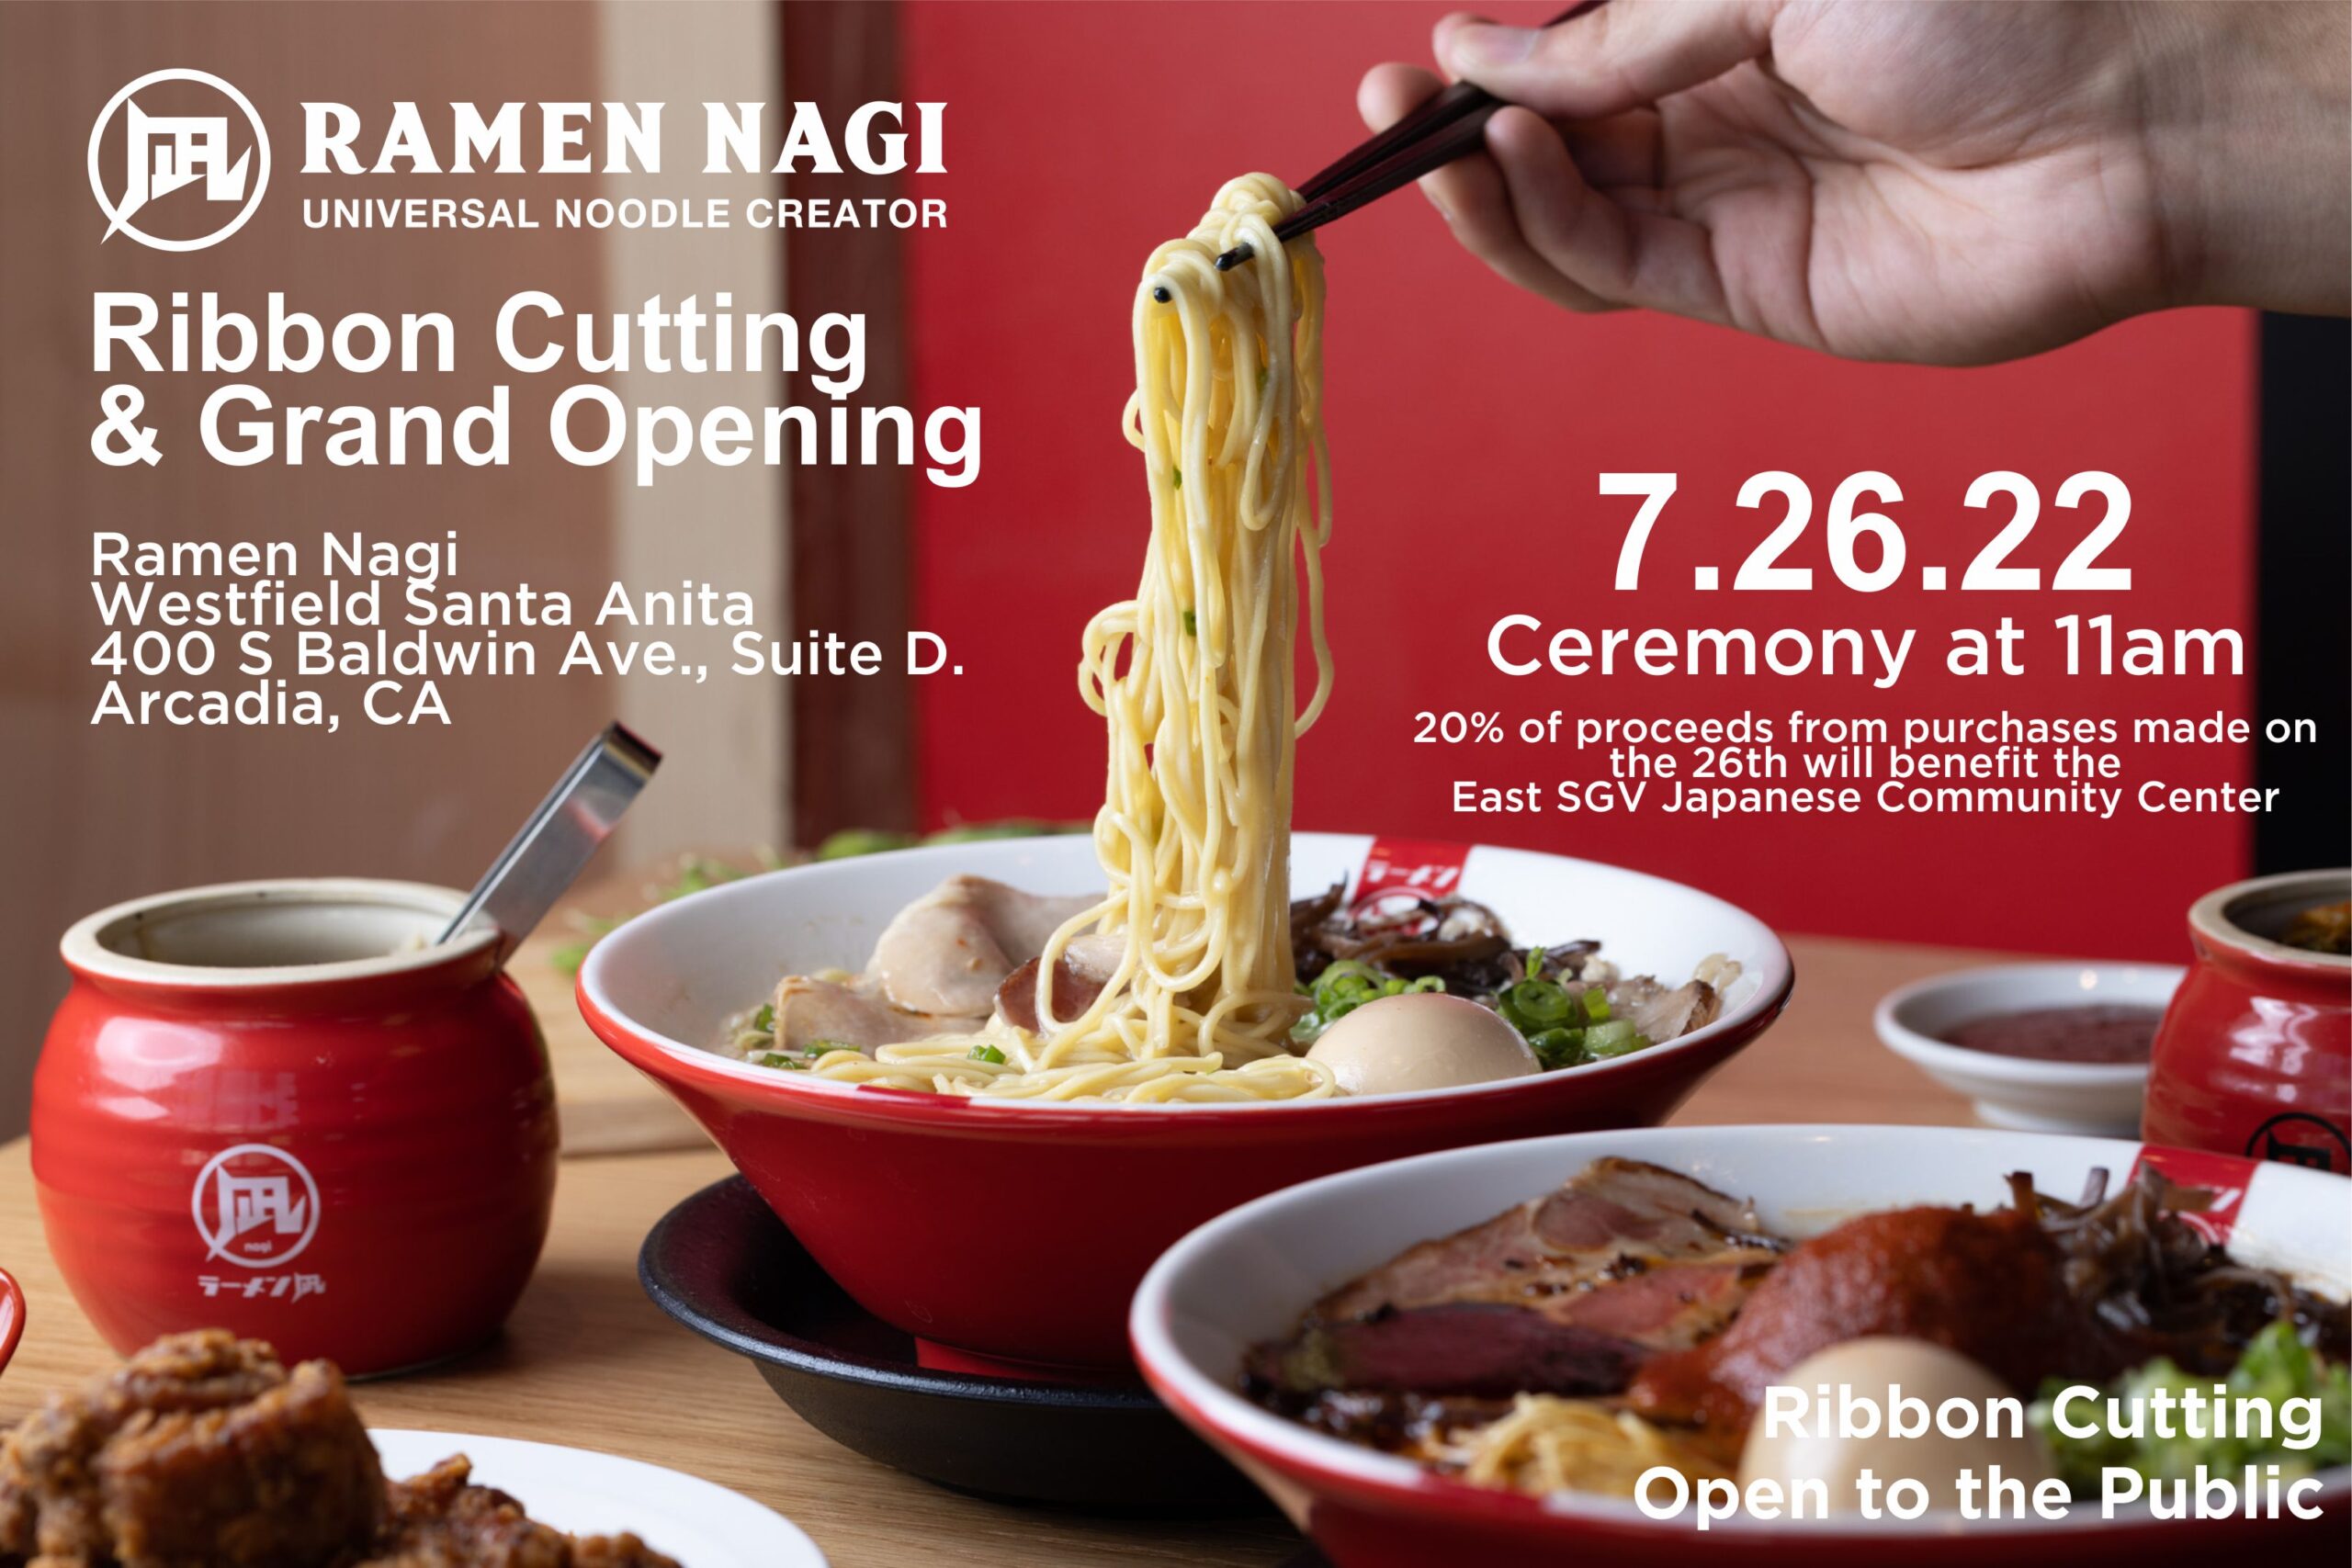 Ramen Nagi ribbon cutting and grand opening showing bowl of noodles on red background